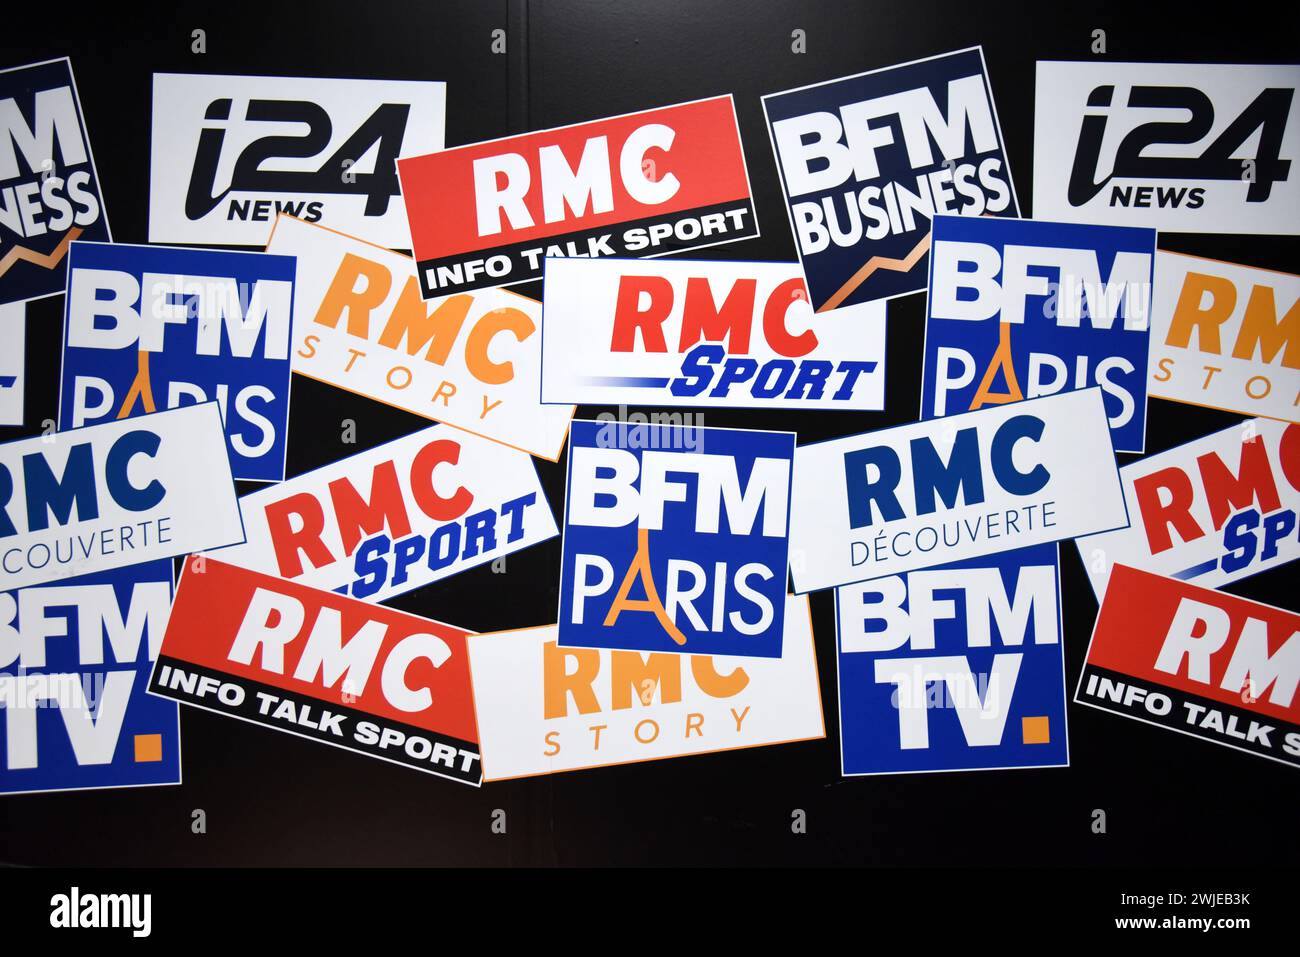 Logos of the Altice Group television channels. I24 News, BFM TV, BFM Business, RMC Sport, RMC Decouverte, BFM Paris, RMC Story, RMC Info Talk Sport Stock Photo